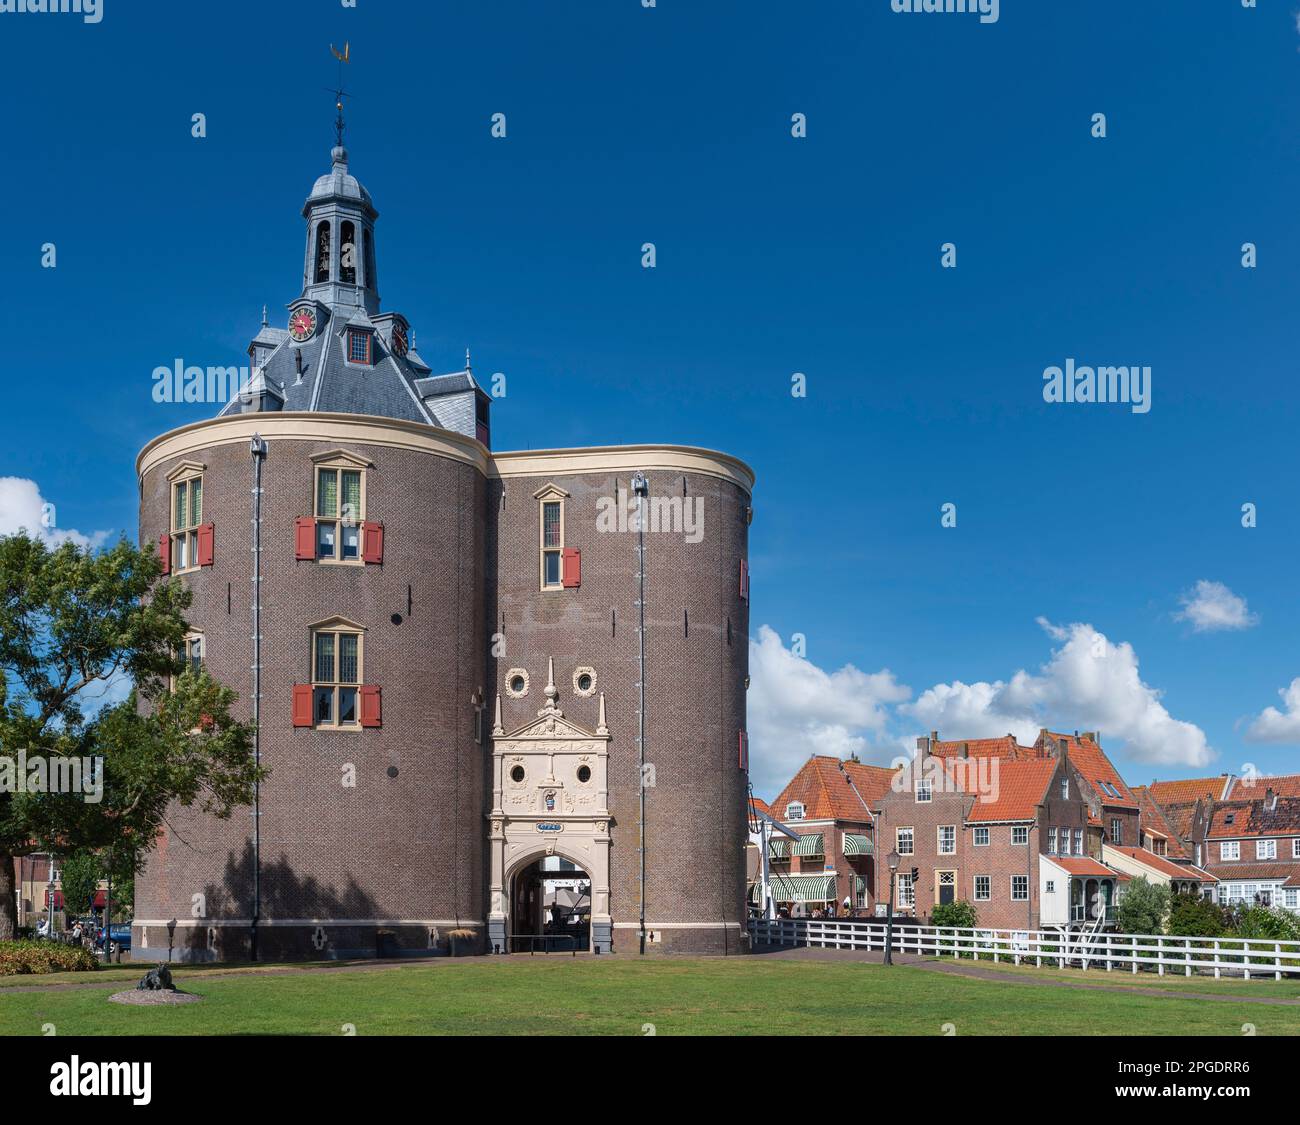 Defense tower dromedaris as part of the former city wall, Enkhuizen, North Holland, Netherlands, Europe Stock Photo